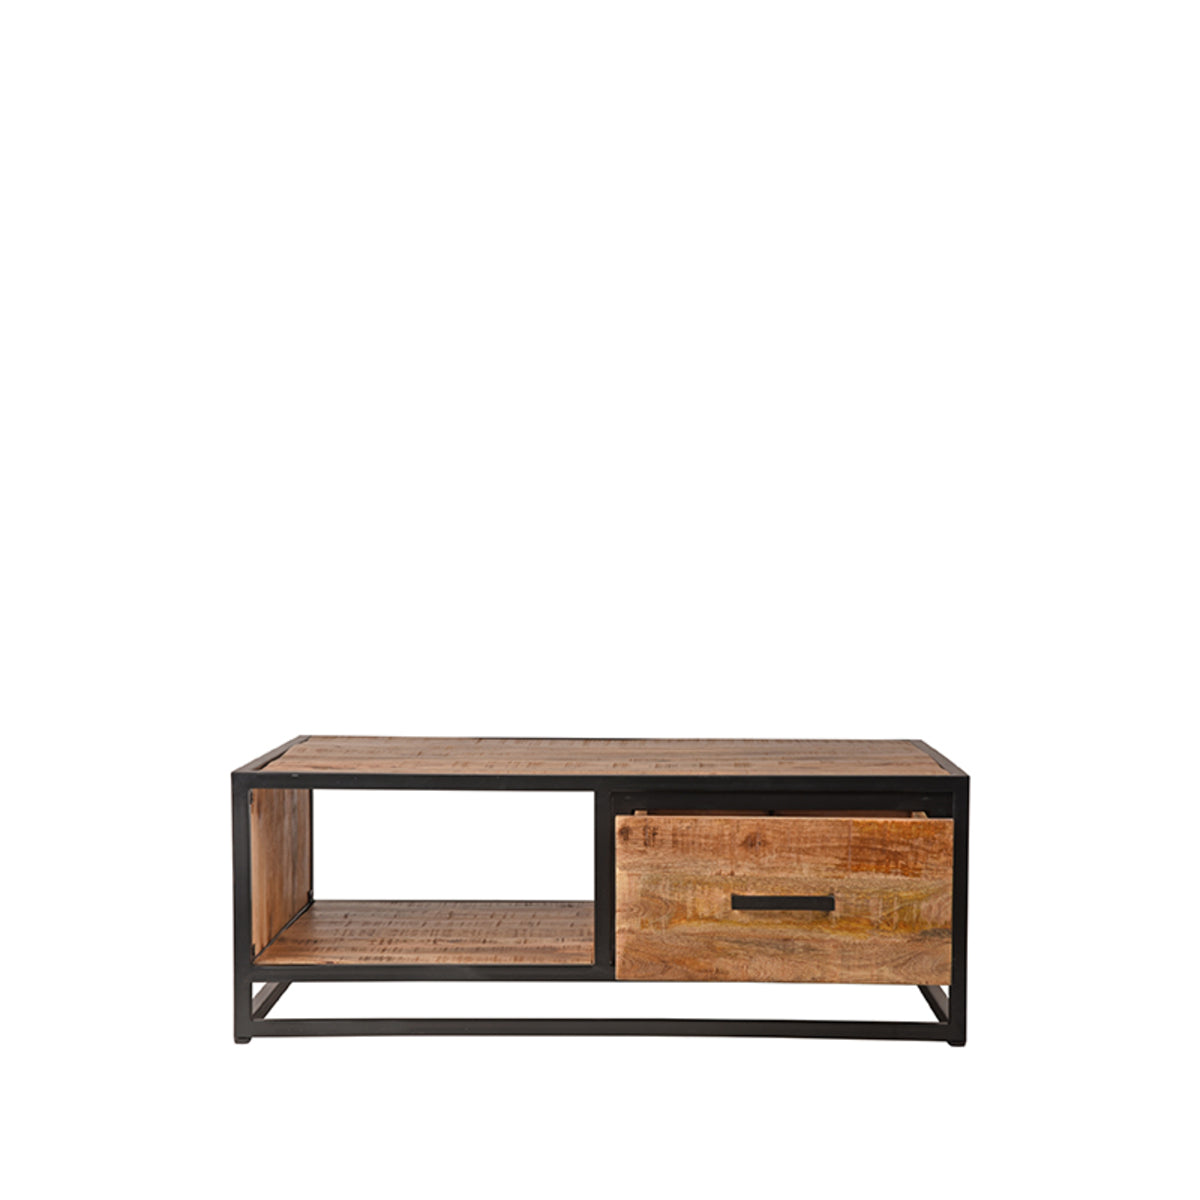 LABEL51 Coffee table Tampa - Rough - Mango wood